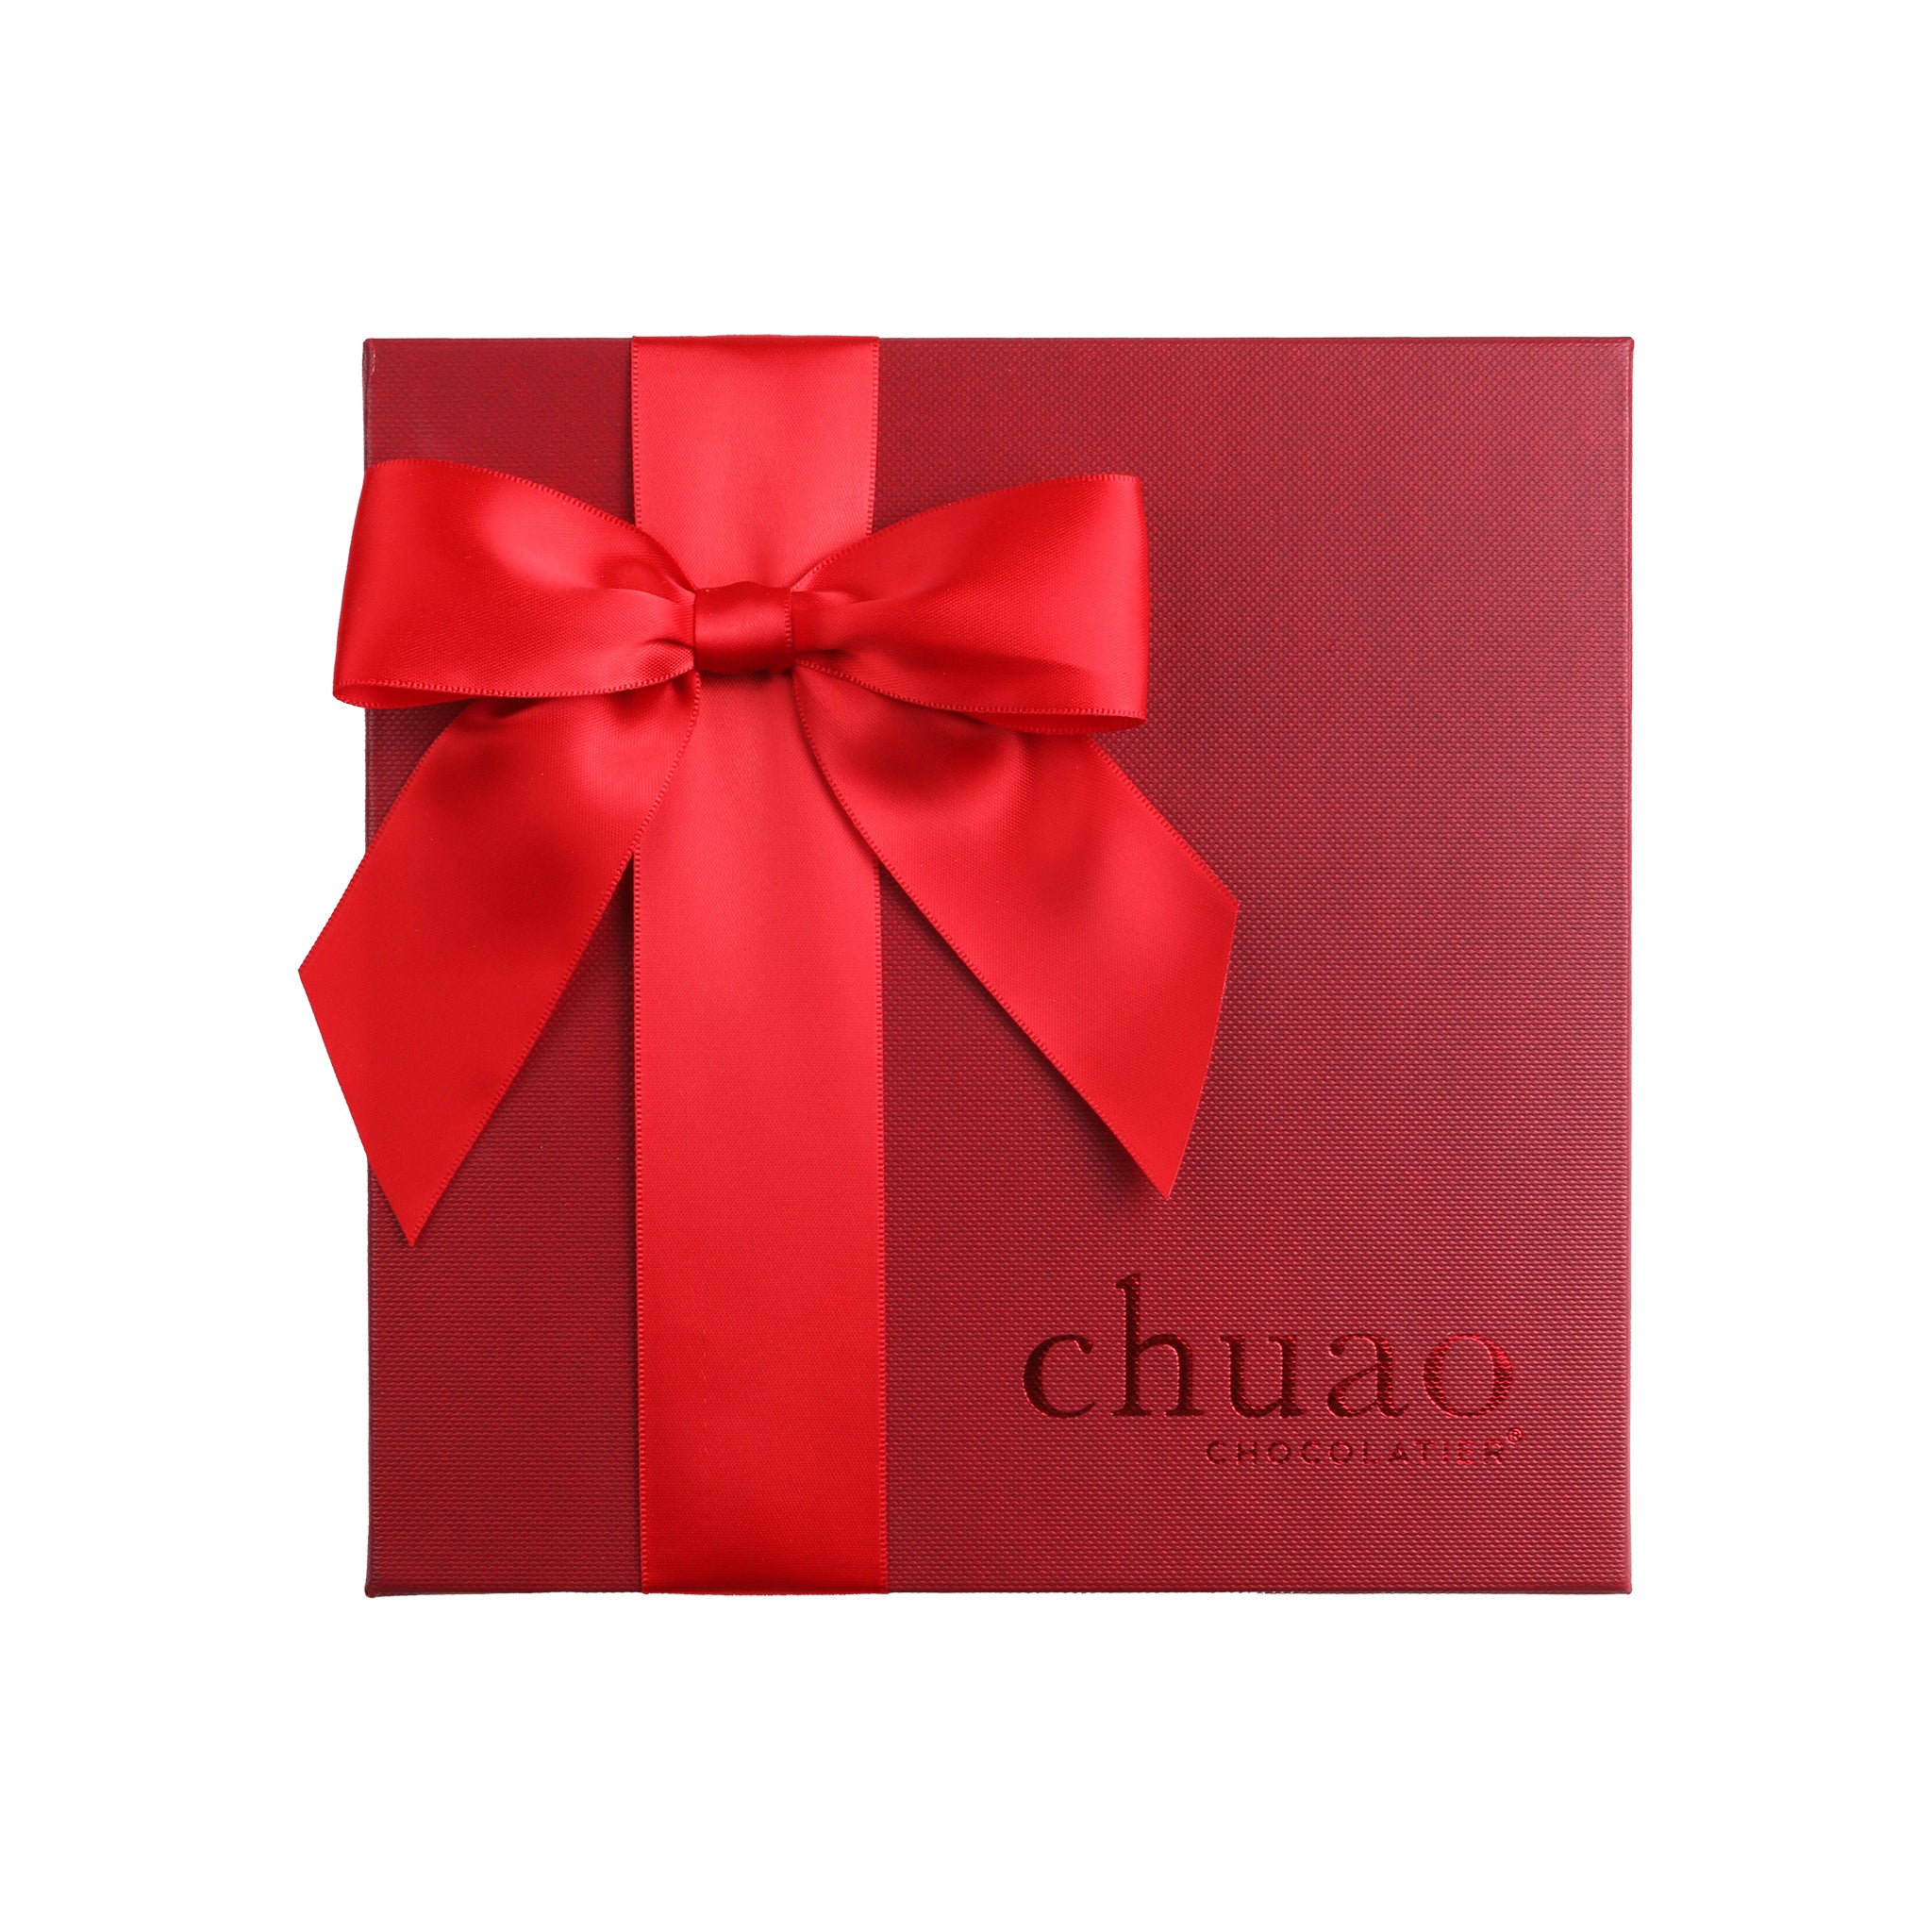 large dark red gift box with bright red bow engraved with chuao